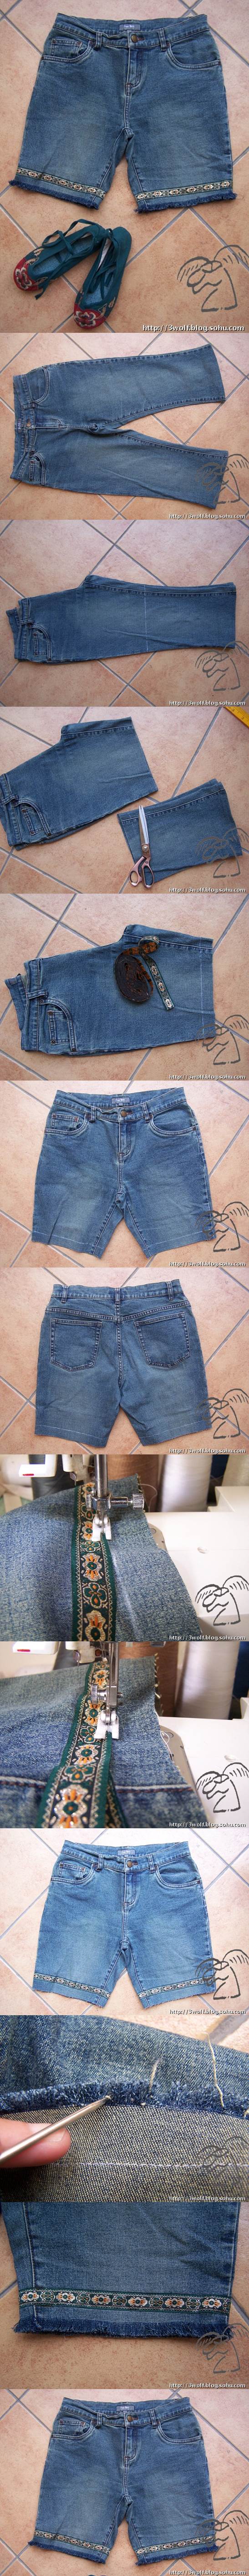 DIY Stylish Shorts from Old Jeans 2